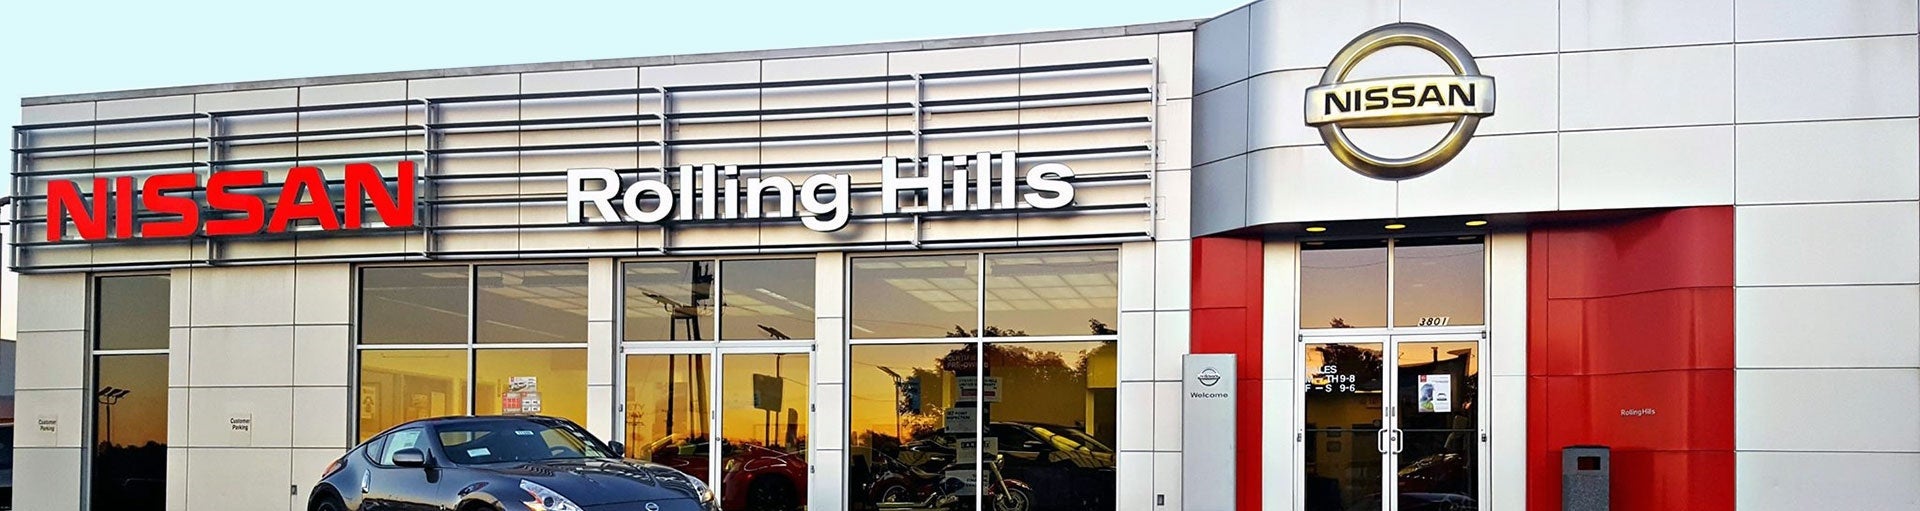 About Us | Rolling Hills Nissan in Saint Joseph MO